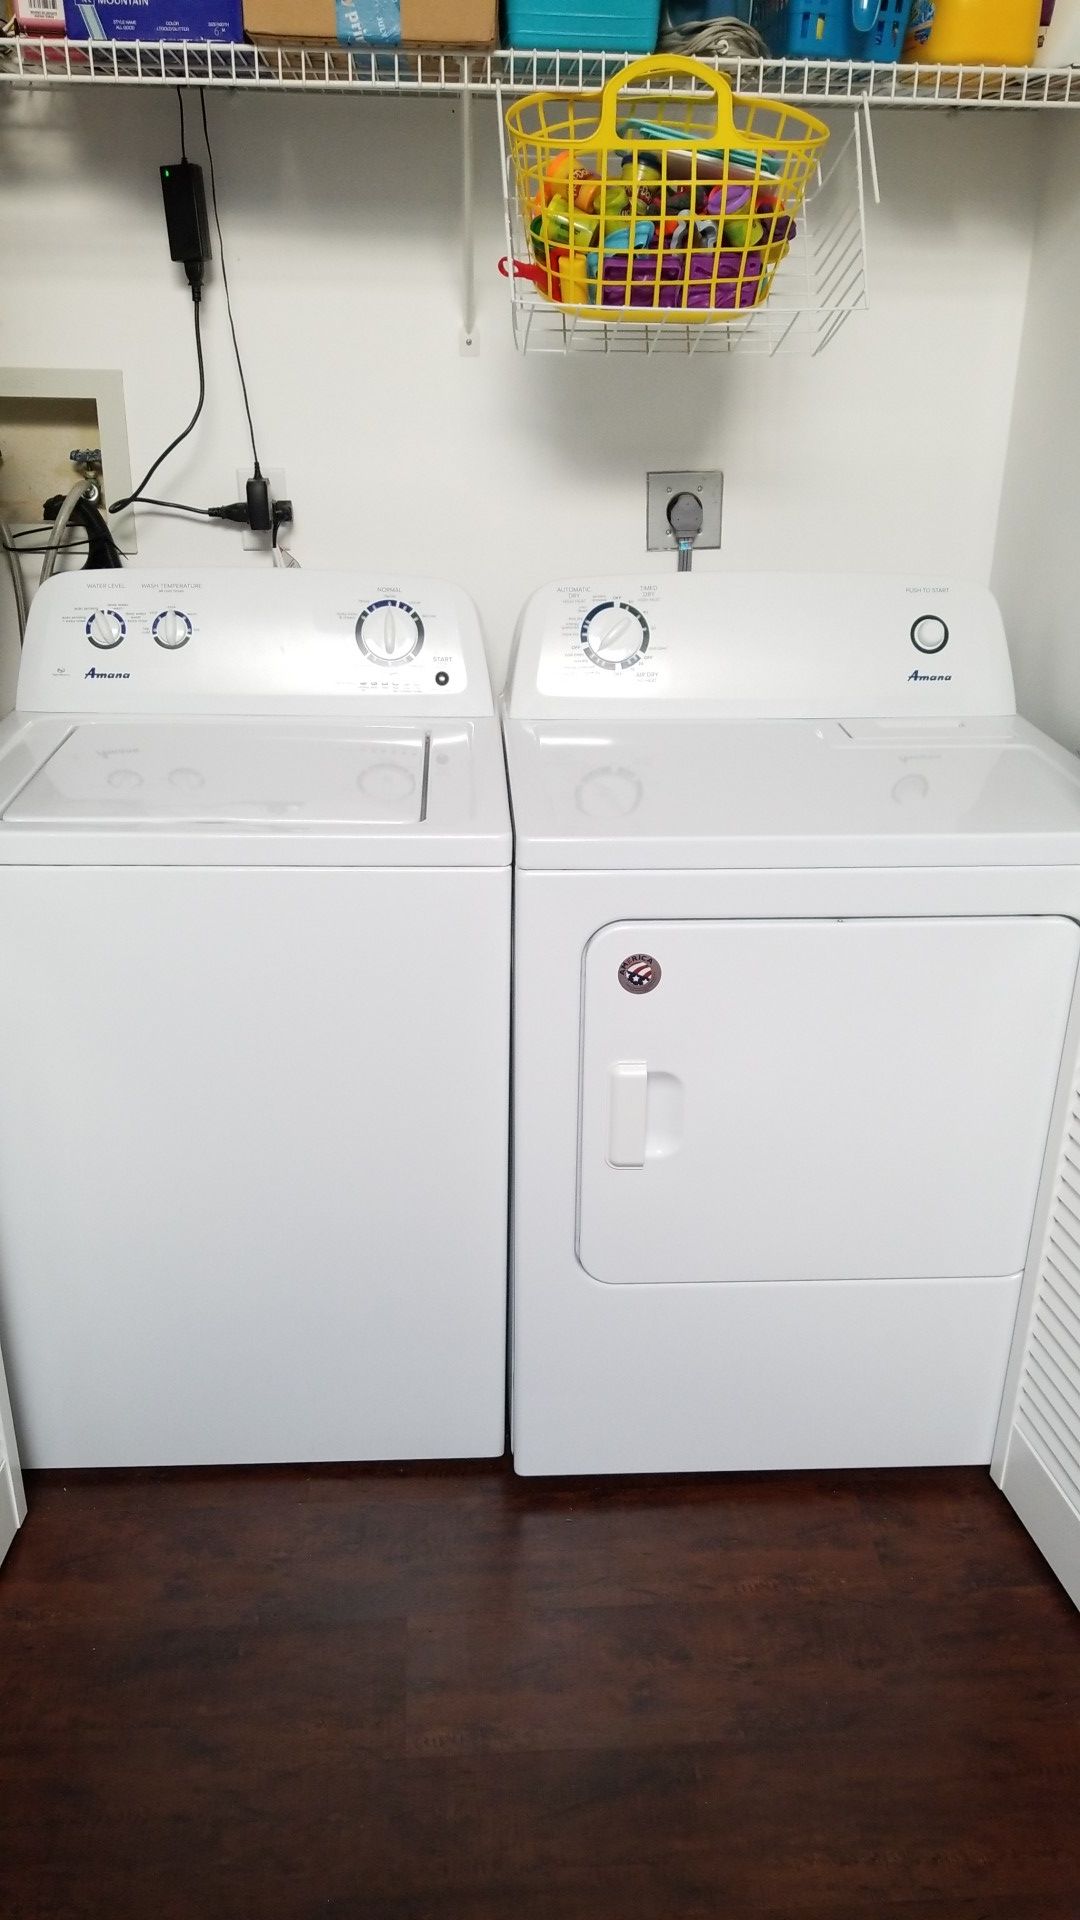 Washer and dryer set Amana home depot